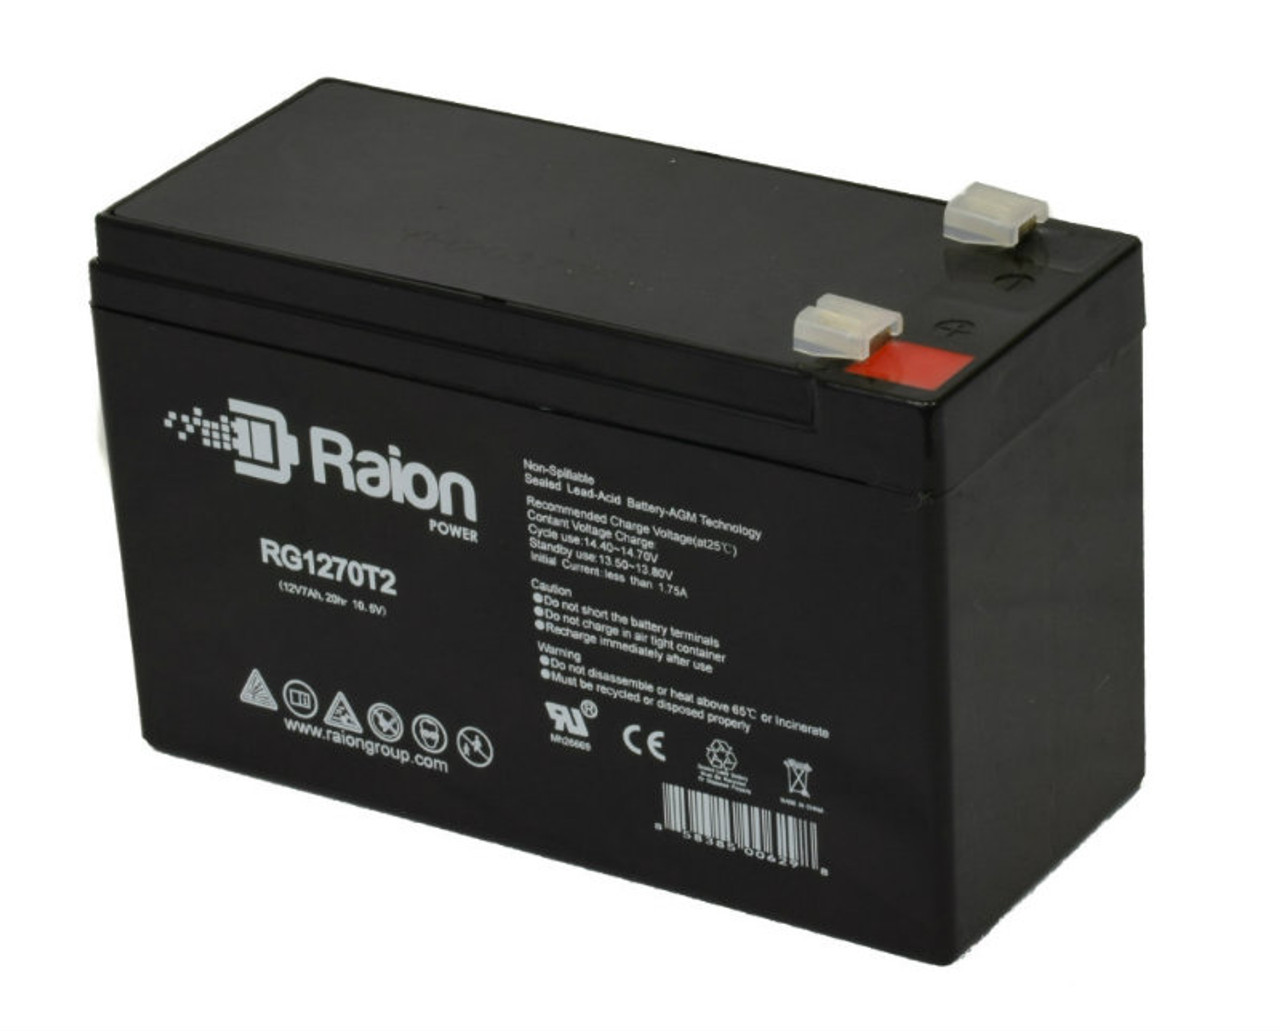 Raion Power RG1270T1 12V 7Ah Non-Spillable Replacement Battery for Zeus Battery PC7-12F1